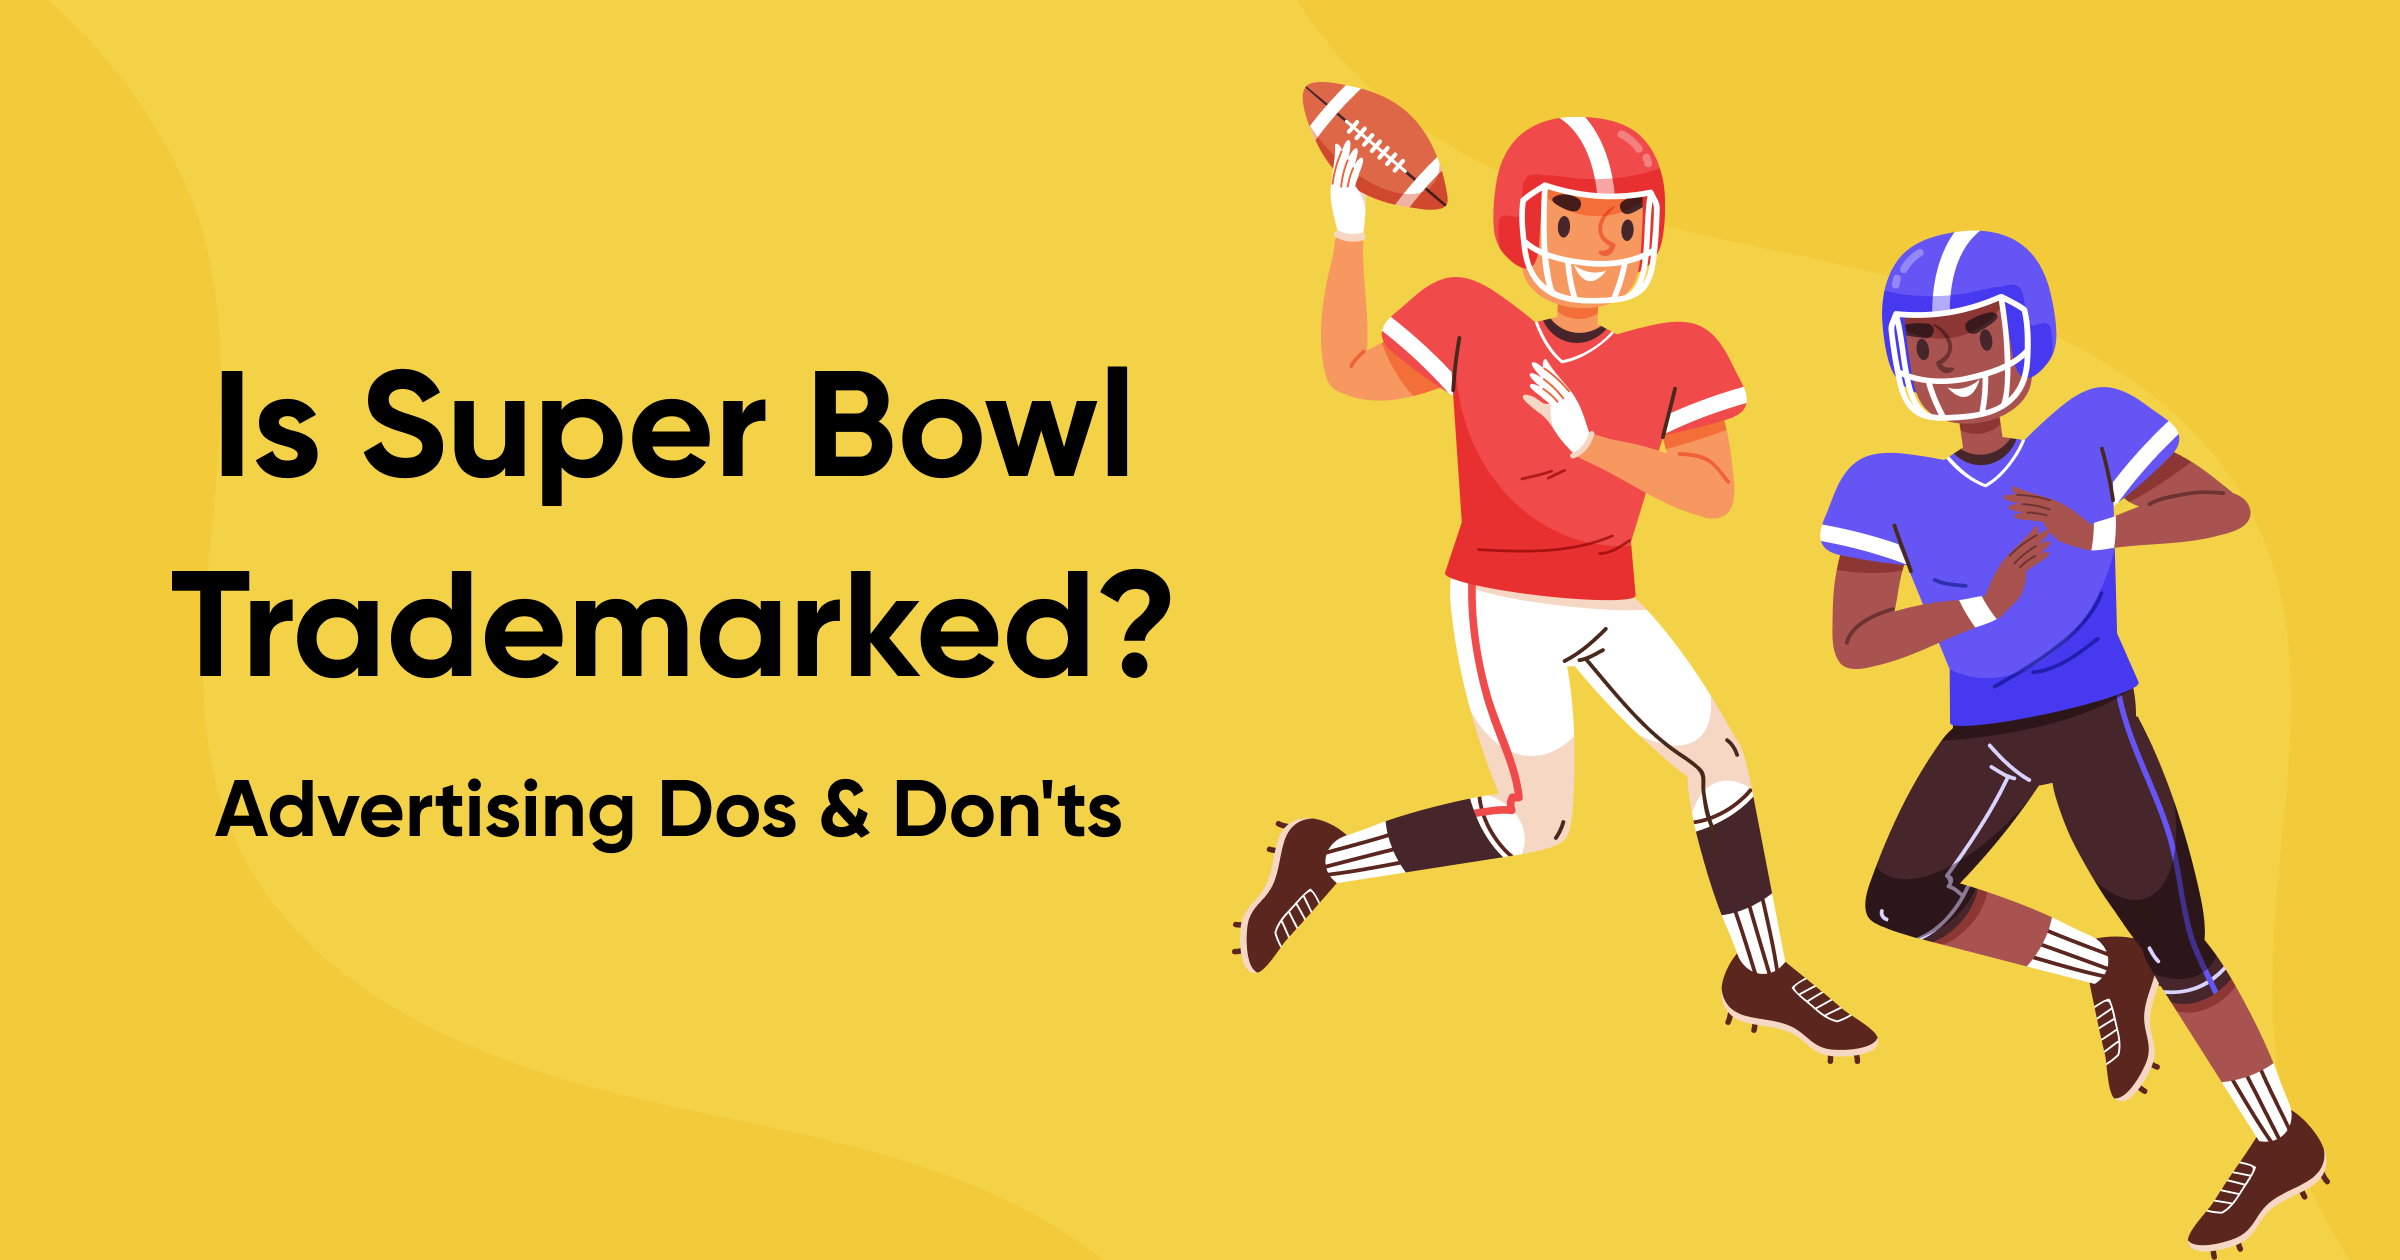 Is Super Bowl Trademarked? Advertising Dos & Don'ts